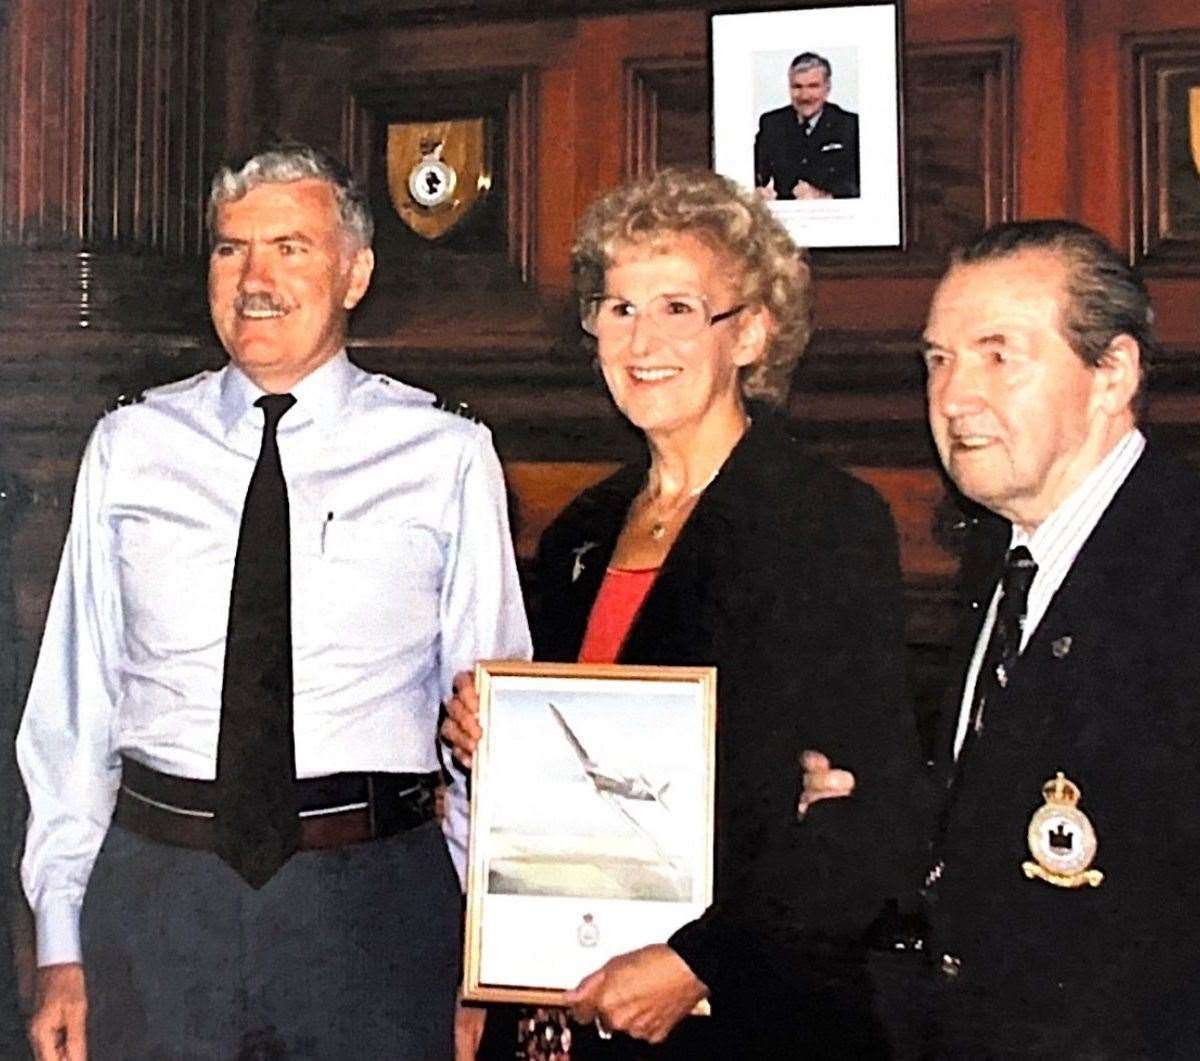 Jean Liddicoat at a ceremony in which she was made an honorary member of the 603 City of Edinburgh Squadron Association